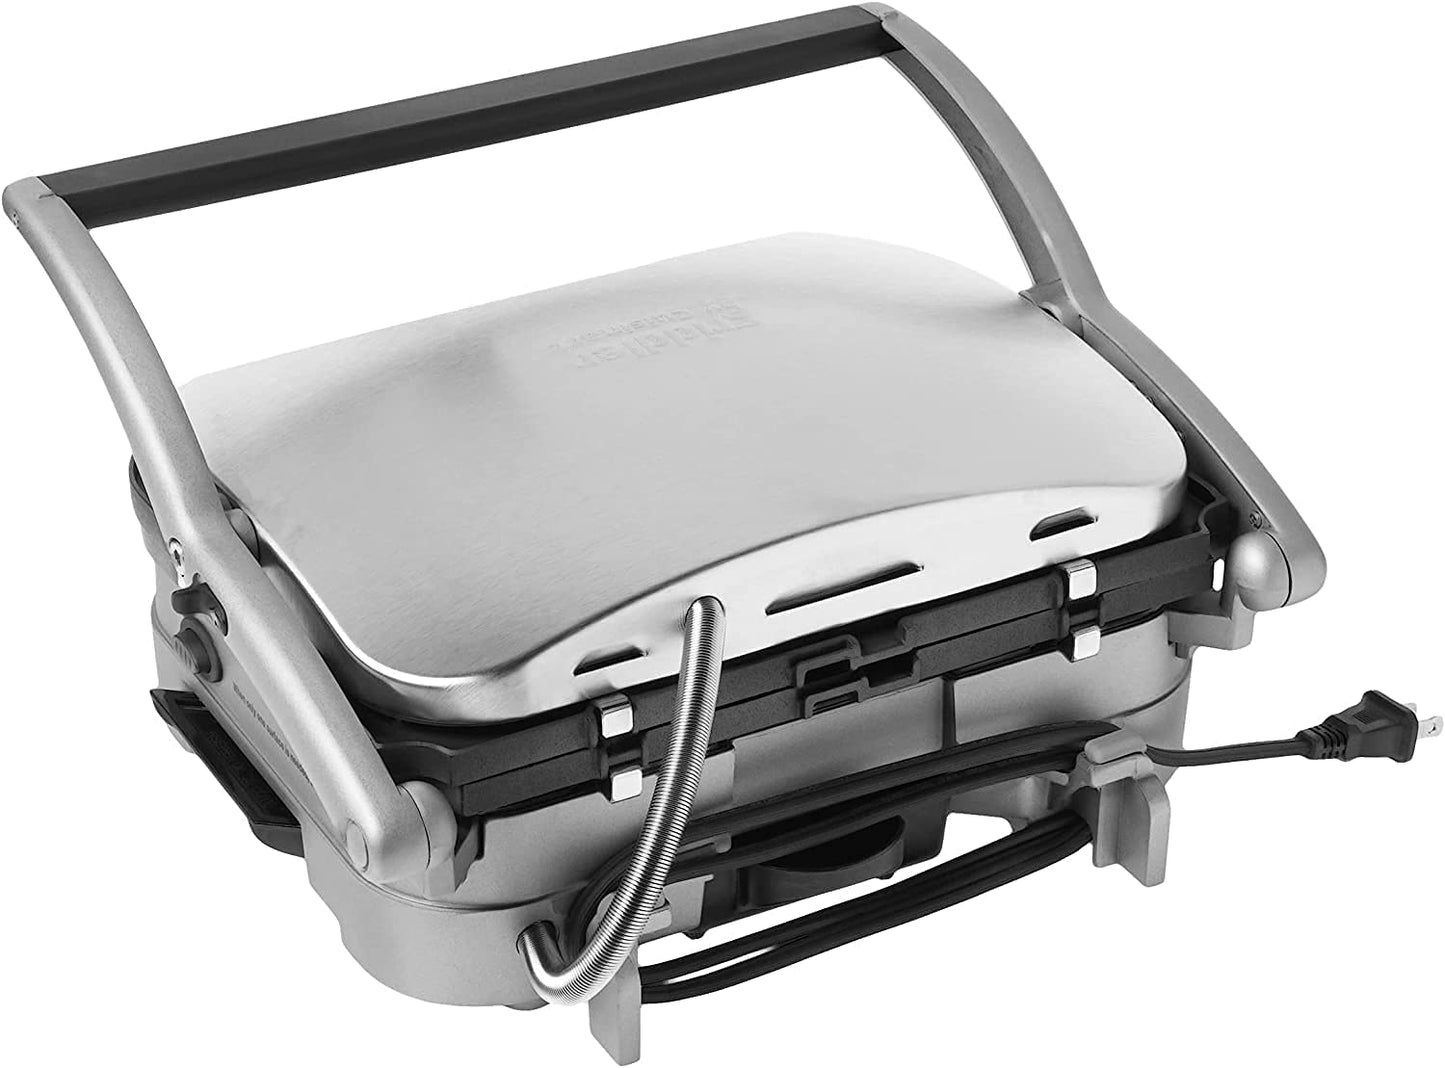 Cuisinart CGR-4NEC 5-in-1 Griddler in Silver with Reversible Nonstick Grill/Griddle Plates - Pre Owned